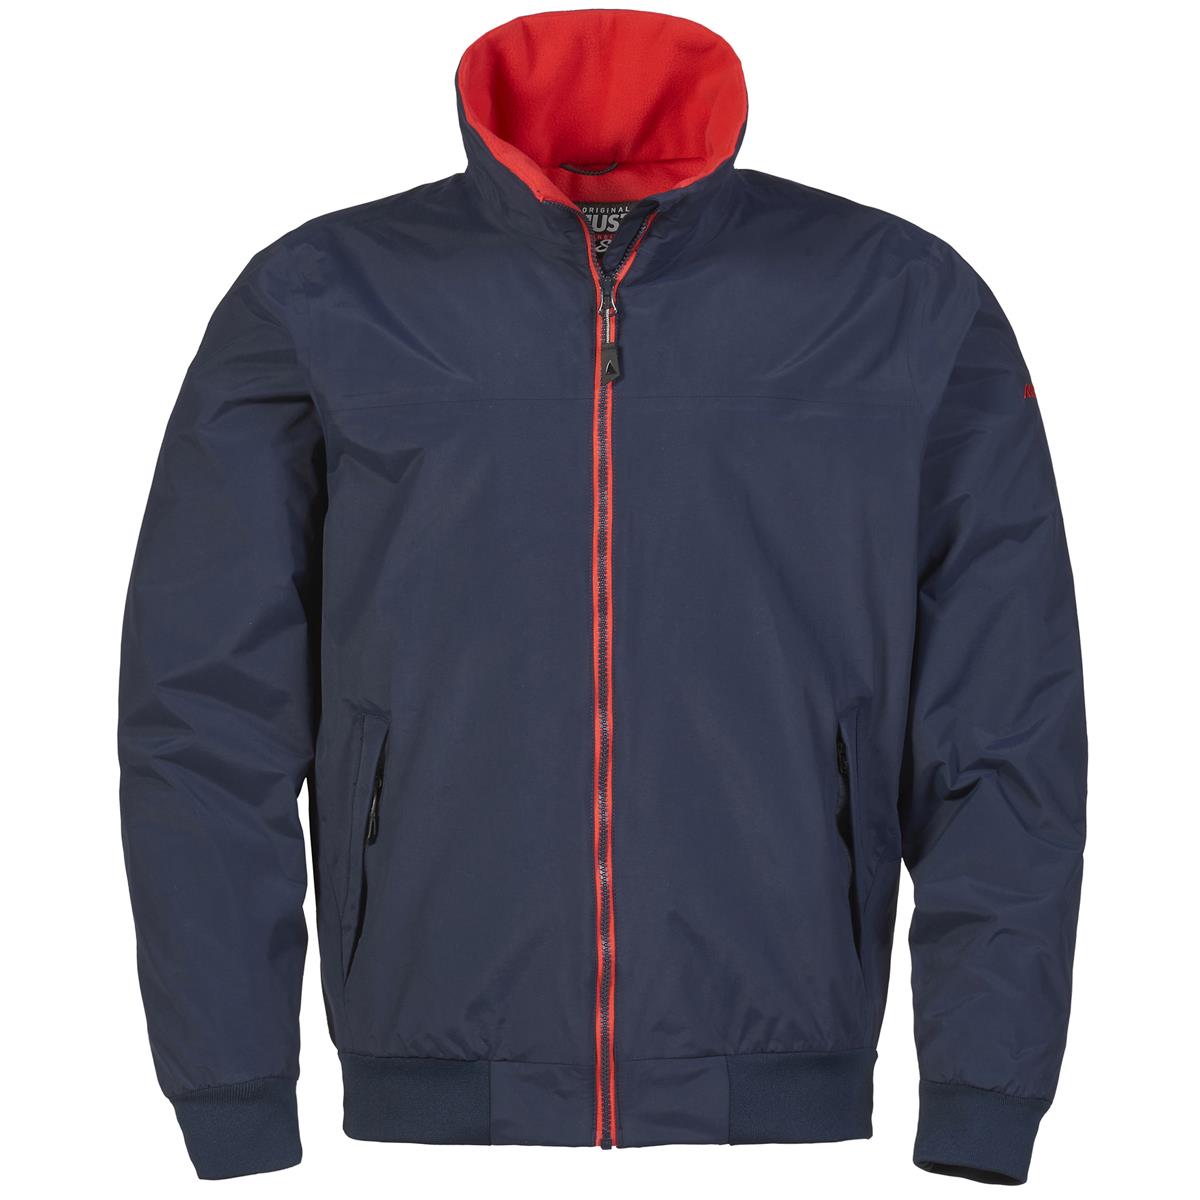 What sizes does the Musto Snug Blouson Jacket 2.0 come in?